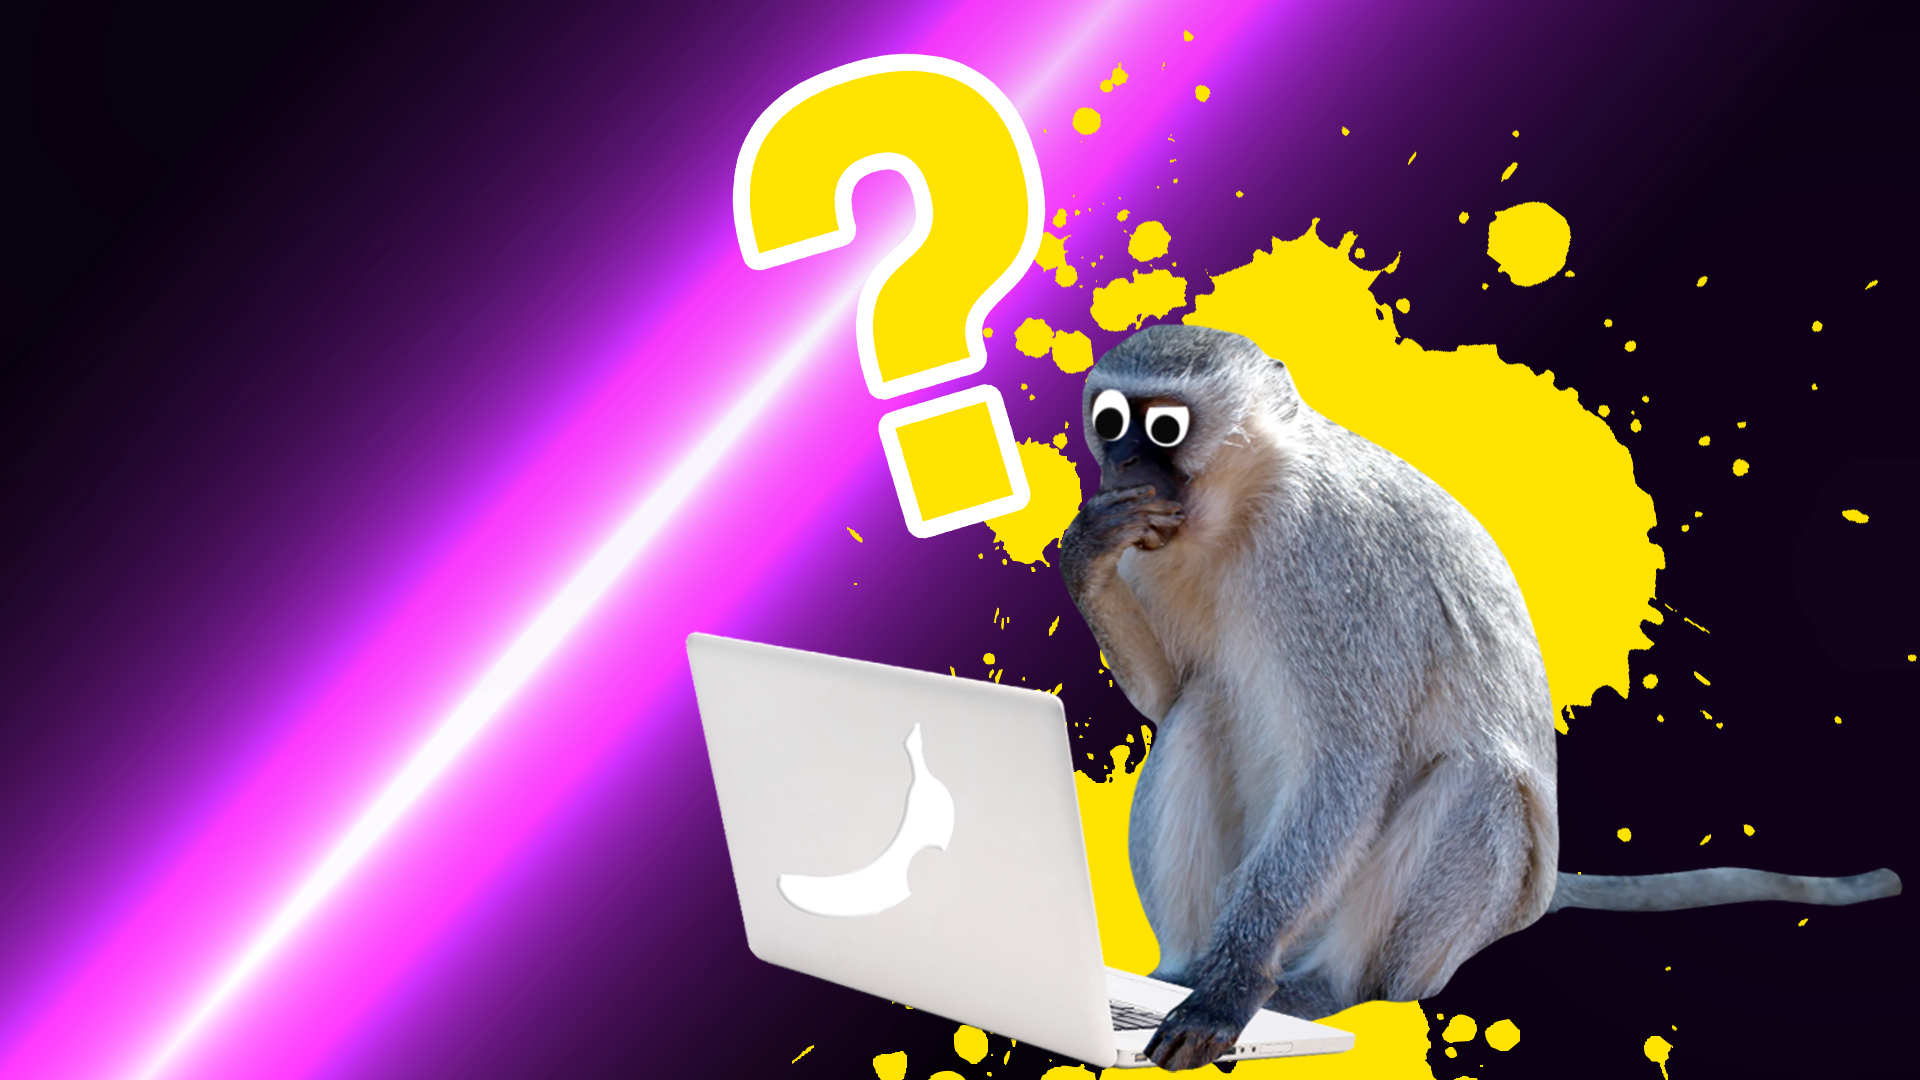 A monkey looking at a laptop